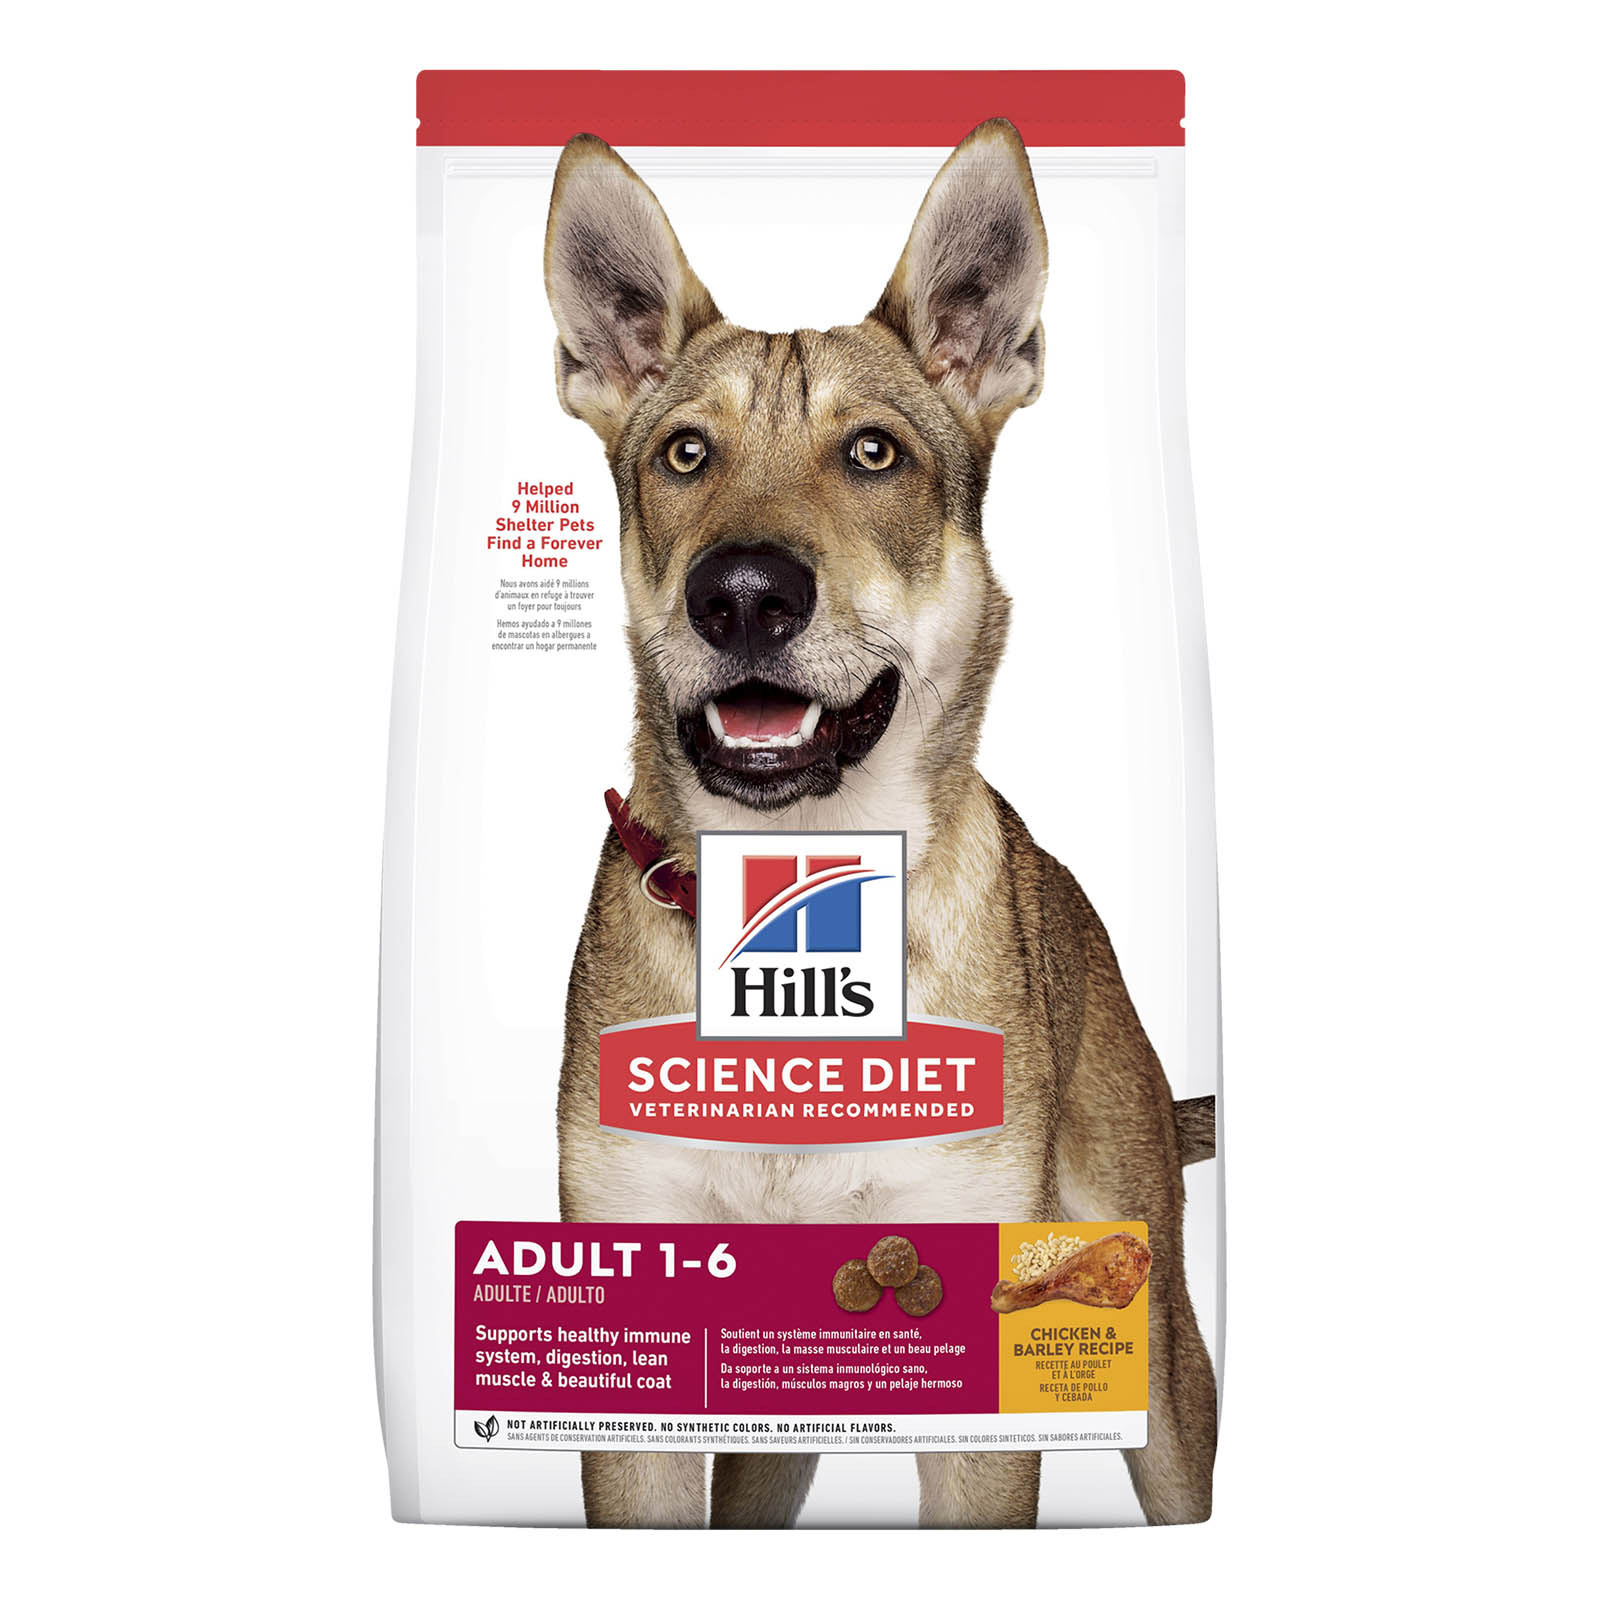 Hill's Science Diet Adult Chicken & Barley Dry Dog Food for Food